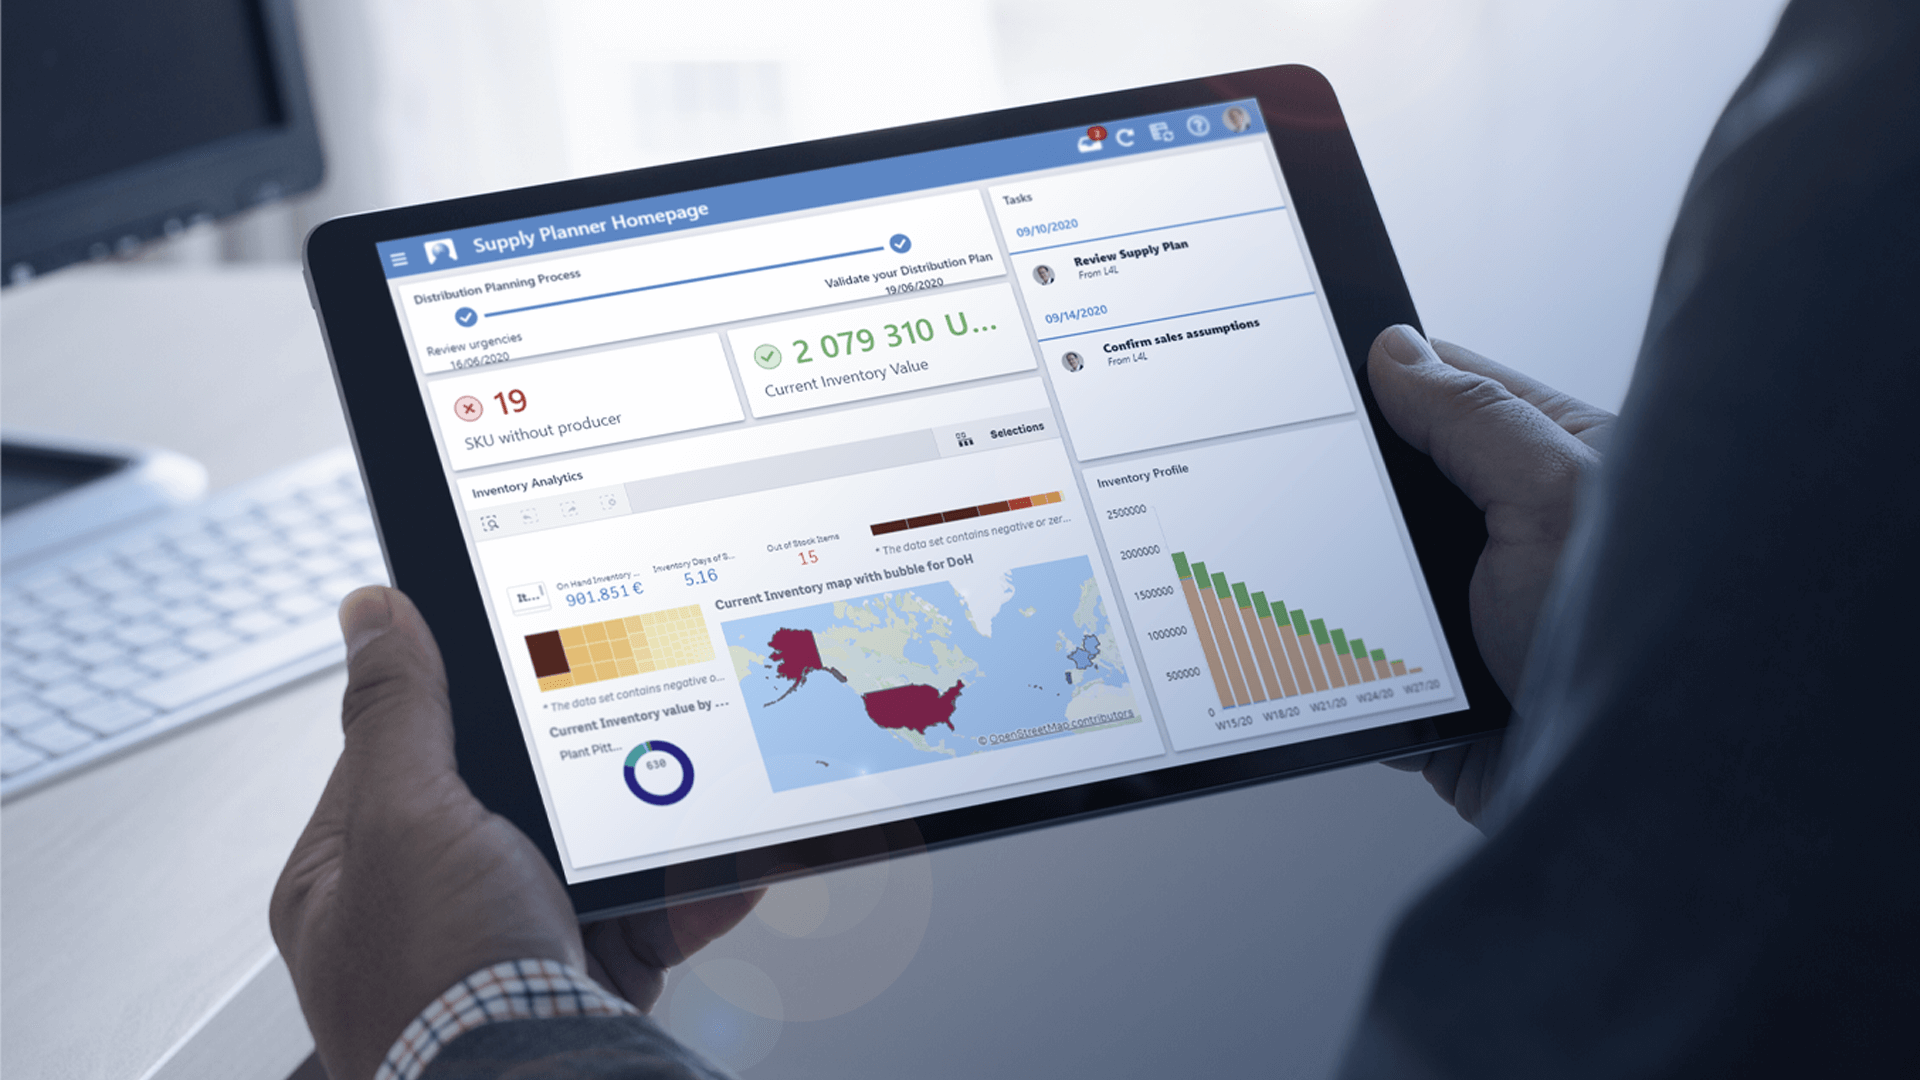 QAD DynaSys Cloud DSCP Software - Digital Supply Chain Planning Dashboard and UX